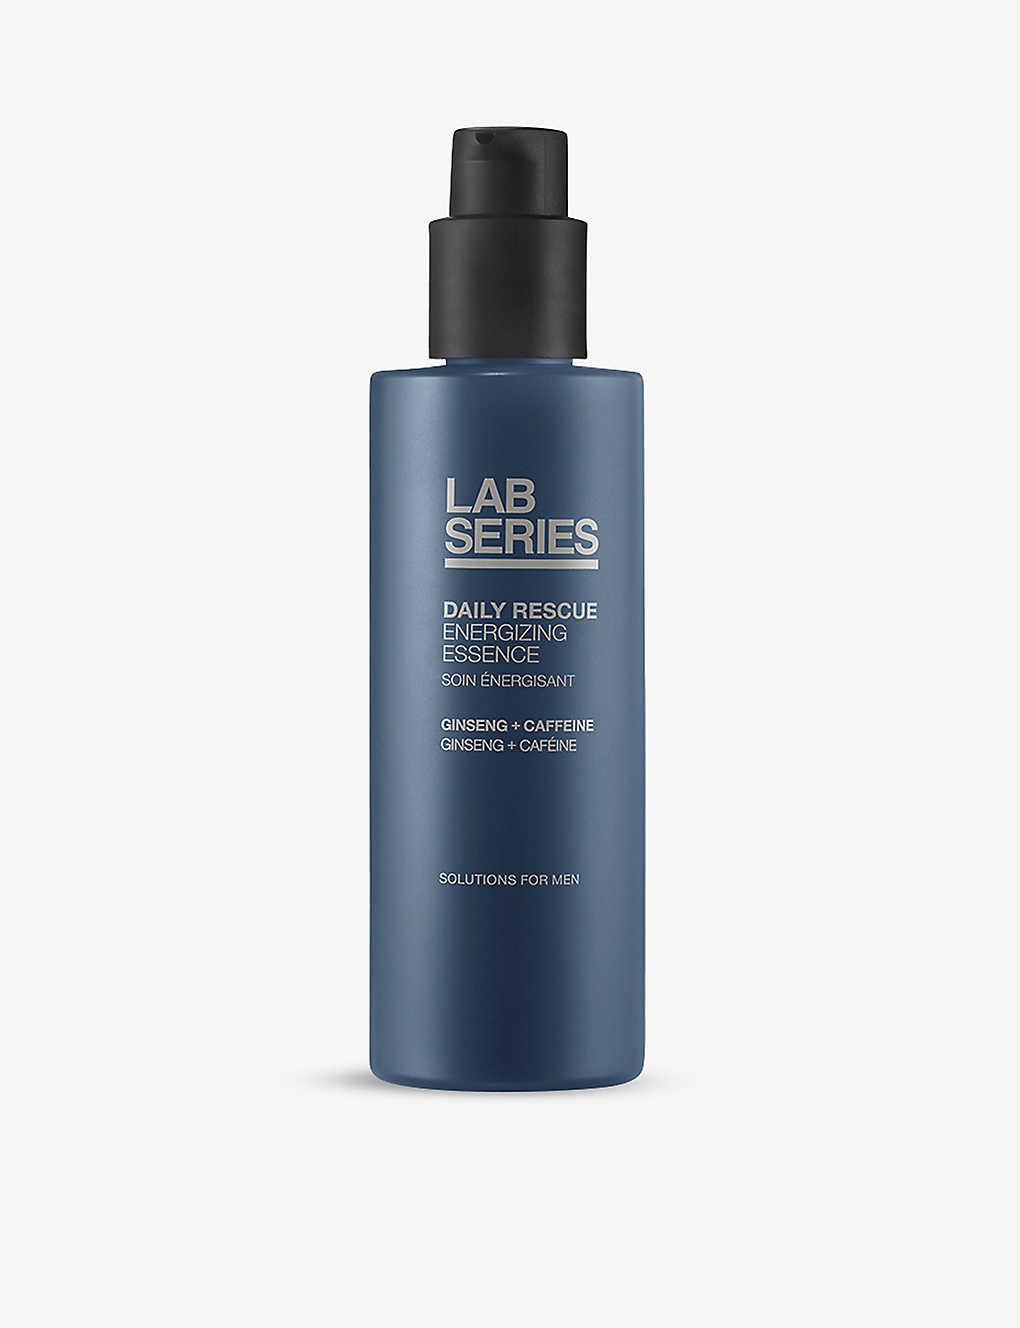 LAB SERIES LAB SERIES DAILY RESCUE ENERGISING ESSENCE,50082996